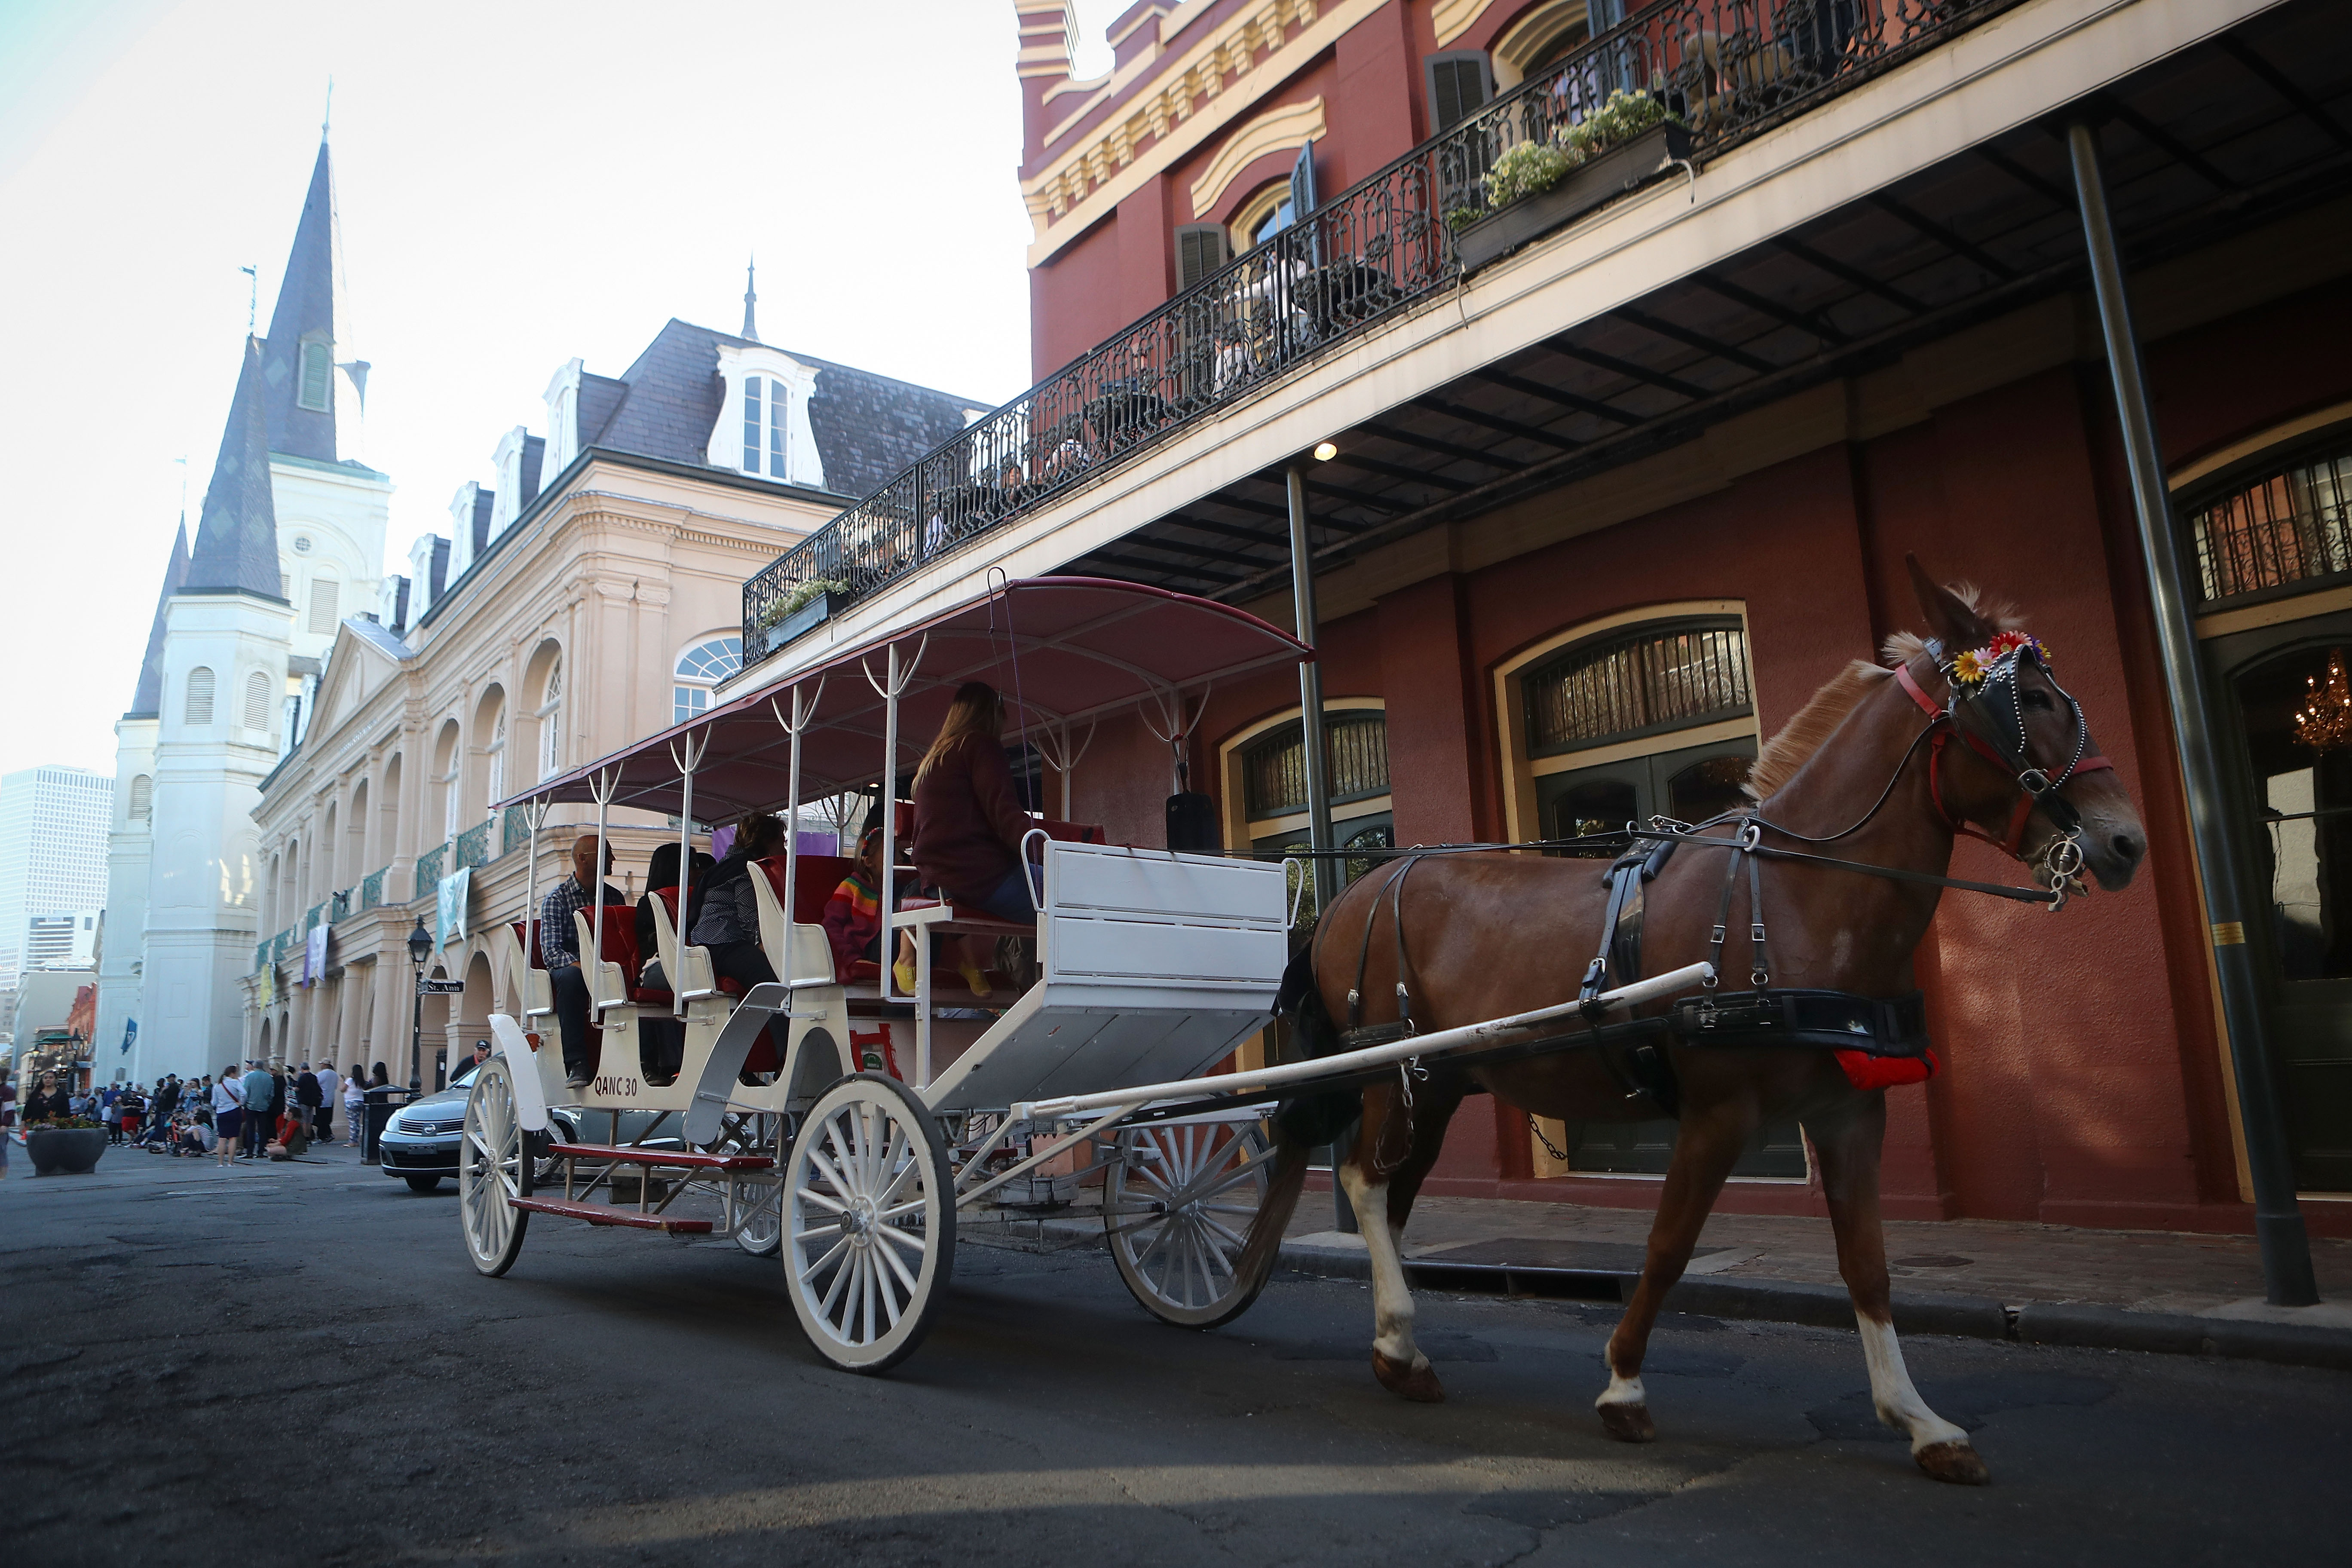 New Orleans Marks 300th Anniversary Of Its Founding